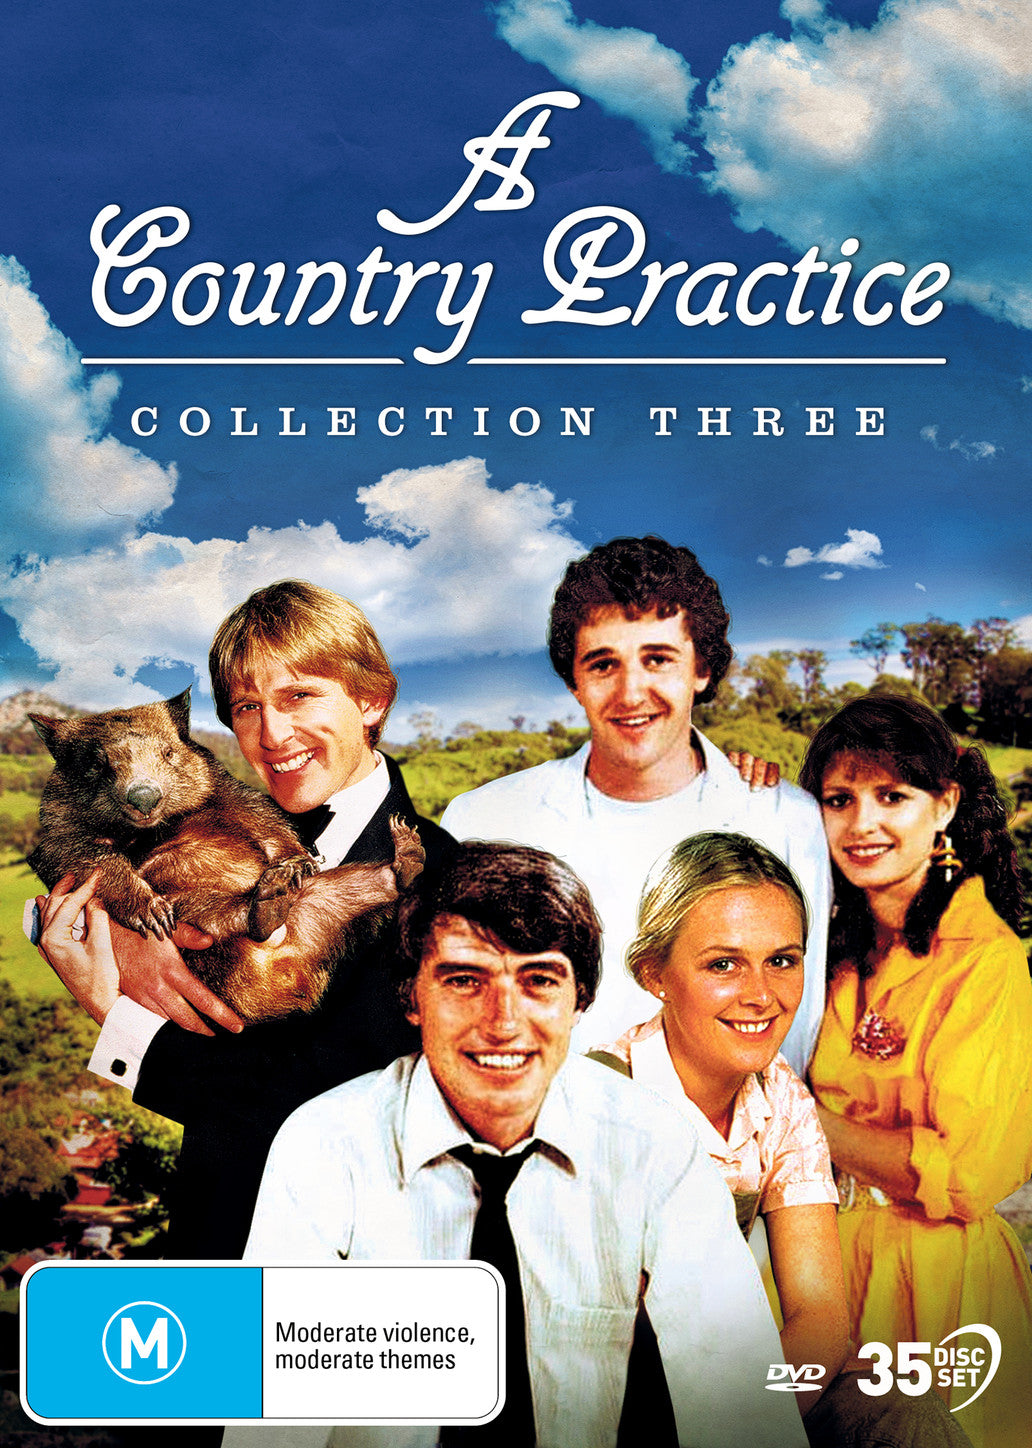 A COUNTRY PRACTICE - COLLECTION 3